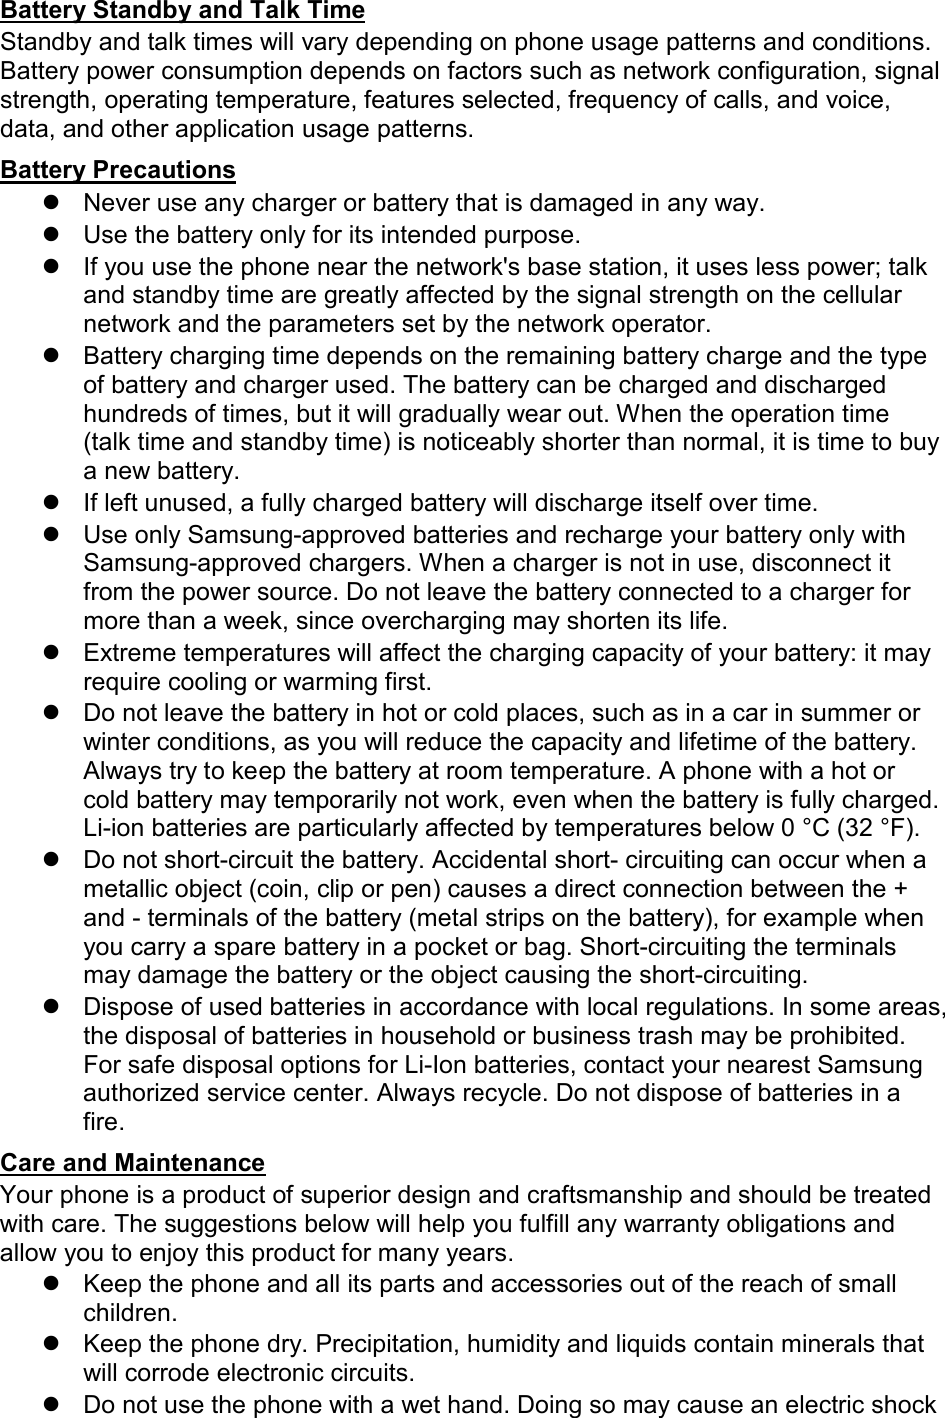 Standby and talk times will vary depending on phone usage patterns and conditions. Battery power consumption depends on factors such as network configuration, signal strength, operating temperature, features selected, frequency of calls, and voice, data, and other application usage patterns.   Battery Standby and Talk Time  Never use any charger or battery that is damaged in any way. Battery Precautions  Use the battery only for its intended purpose.  If you use the phone near the network&apos;s base station, it uses less power; talk and standby time are greatly affected by the signal strength on the cellular network and the parameters set by the network operator.  Battery charging time depends on the remaining battery charge and the type of battery and charger used. The battery can be charged and discharged hundreds of times, but it will gradually wear out. When the operation time (talk time and standby time) is noticeably shorter than normal, it is time to buy a new battery.  If left unused, a fully charged battery will discharge itself over time.  Use only Samsung-approved batteries and recharge your battery only with Samsung-approved chargers. When a charger is not in use, disconnect it from the power source. Do not leave the battery connected to a charger for more than a week, since overcharging may shorten its life.  Extreme temperatures will affect the charging capacity of your battery: it may require cooling or warming first.  Do not leave the battery in hot or cold places, such as in a car in summer or winter conditions, as you will reduce the capacity and lifetime of the battery. Always try to keep the battery at room temperature. A phone with a hot or cold battery may temporarily not work, even when the battery is fully charged. Li-ion batteries are particularly affected by temperatures below 0 °C (32 °F).  Do not short-circuit the battery. Accidental short- circuiting can occur when a metallic object (coin, clip or pen) causes a direct connection between the + and - terminals of the battery (metal strips on the battery), for example when you carry a spare battery in a pocket or bag. Short-circuiting the terminals may damage the battery or the object causing the short-circuiting.  Dispose of used batteries in accordance with local regulations. In some areas, the disposal of batteries in household or business trash may be prohibited. For safe disposal options for Li-Ion batteries, contact your nearest Samsung authorized service center. Always recycle. Do not dispose of batteries in a fire. Your phone is a product of superior design and craftsmanship and should be treated with care. The suggestions below will help you fulfill any warranty obligations and allow you to enjoy this product for many years. Care and Maintenance  Keep the phone and all its parts and accessories out of the reach of small children.  Keep the phone dry. Precipitation, humidity and liquids contain minerals that will corrode electronic circuits.  Do not use the phone with a wet hand. Doing so may cause an electric shock 